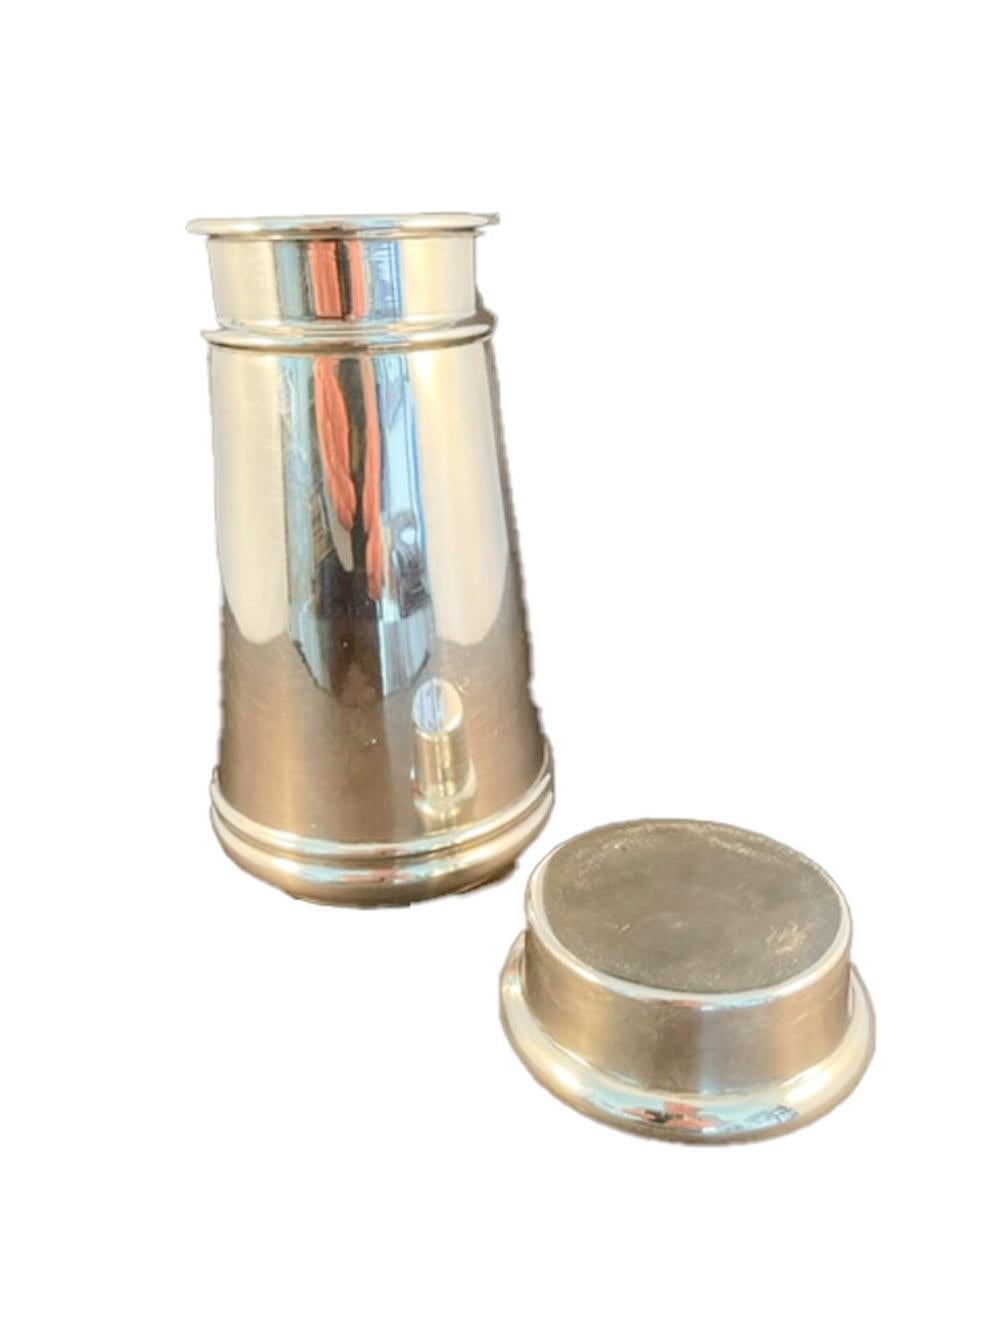 20th Century English Art Deco Silver Plate Cocktail Shaker, Charles S. Green & Co. For Sale